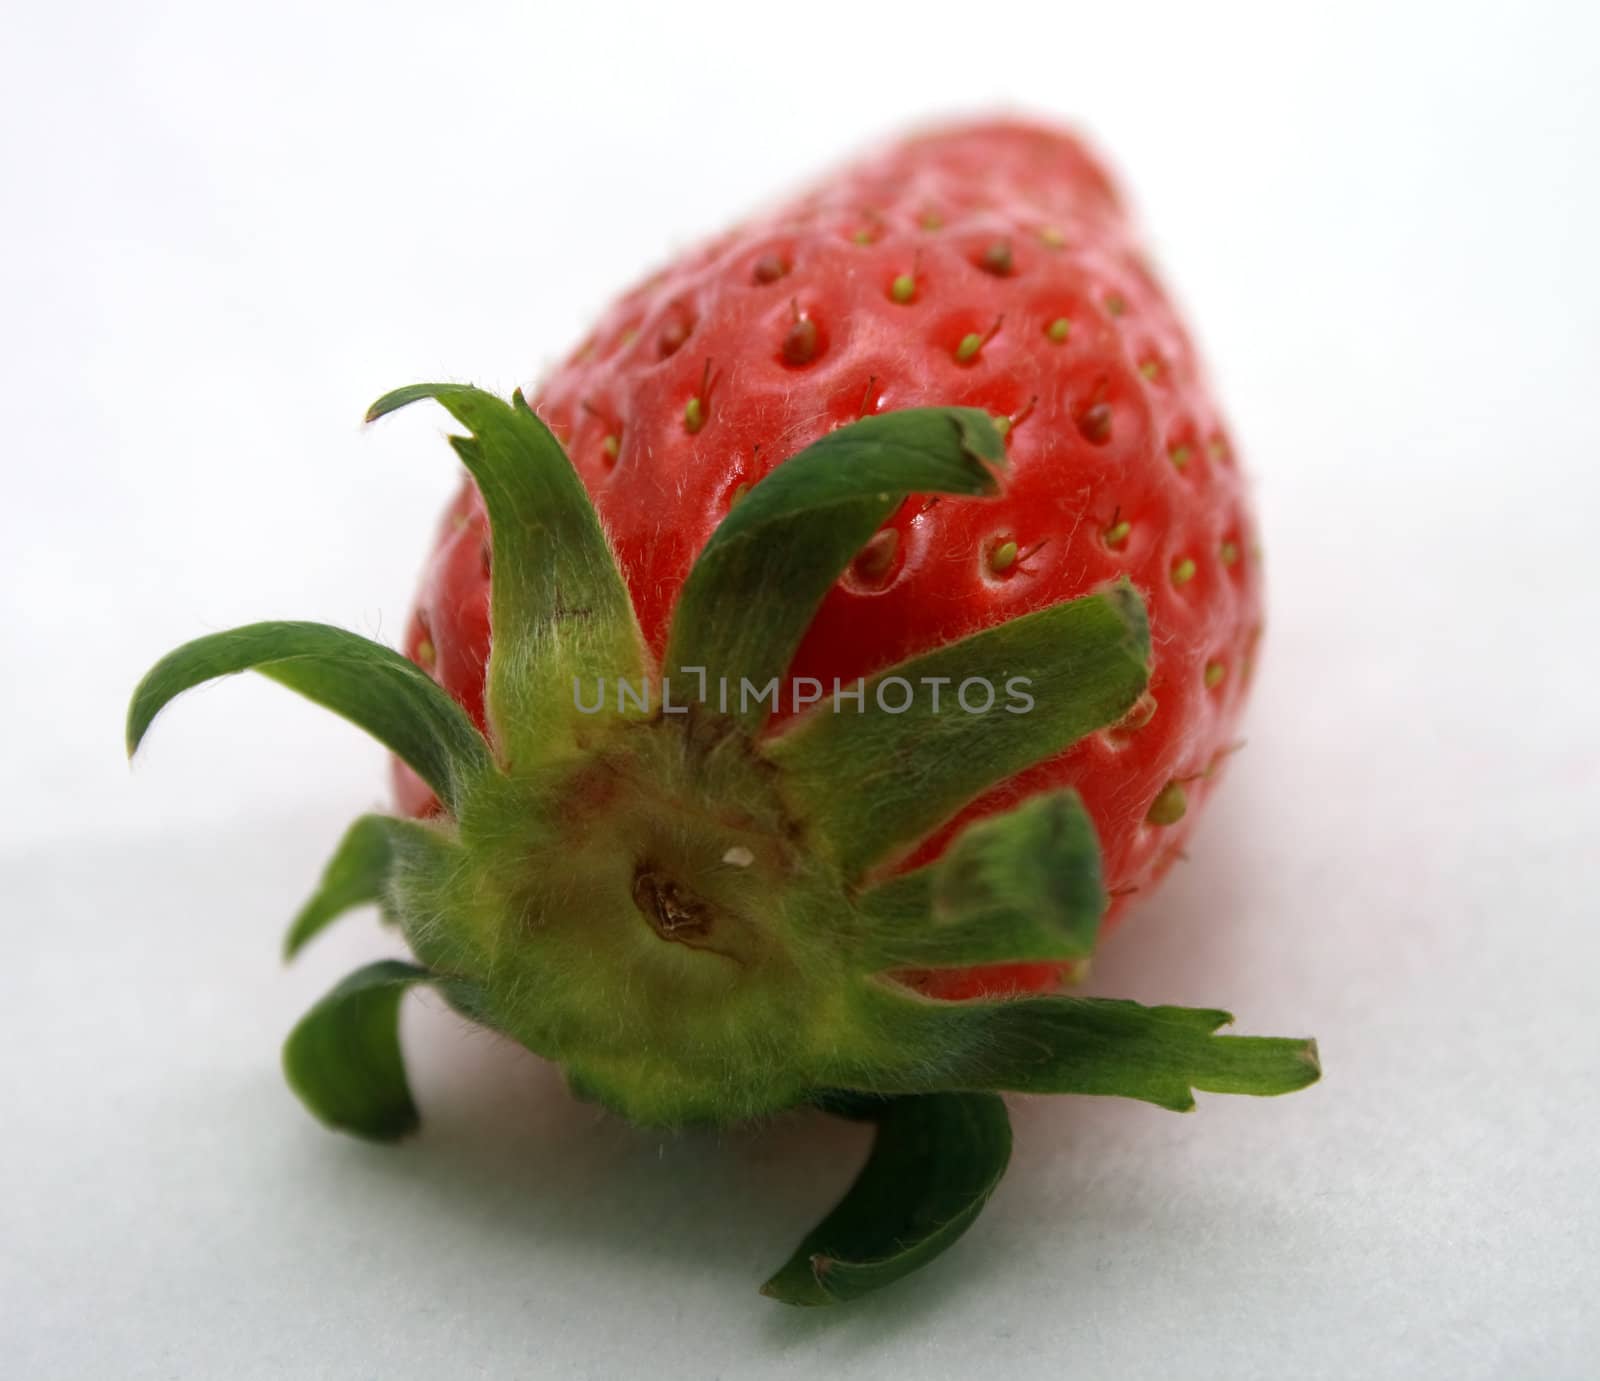 A brightly red strawberry on a light background